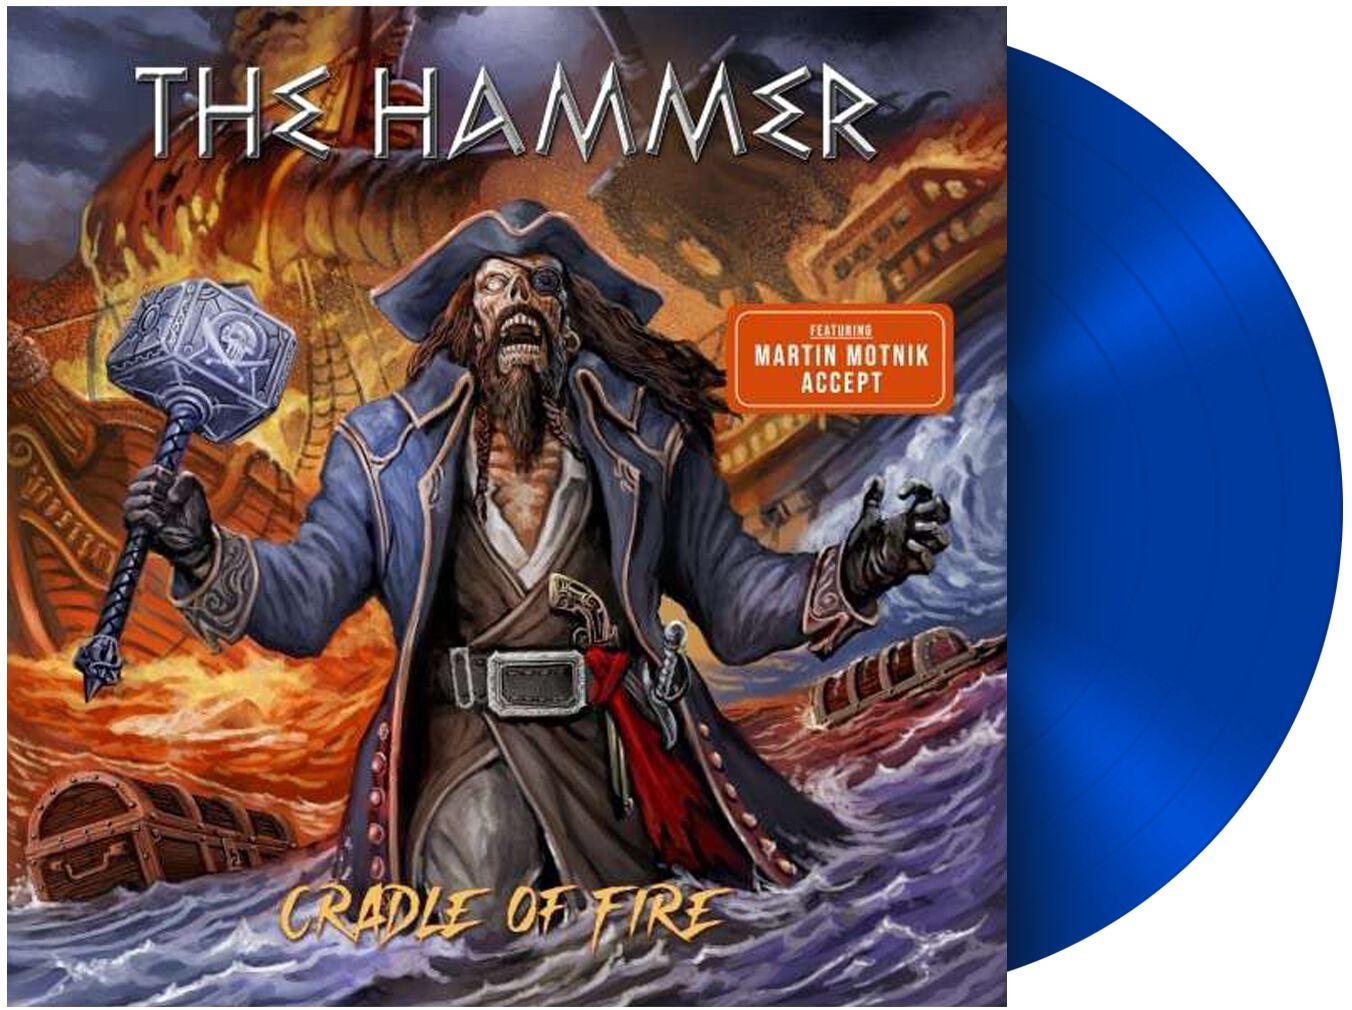 The Hammer Cradle of fire SINGLE blue